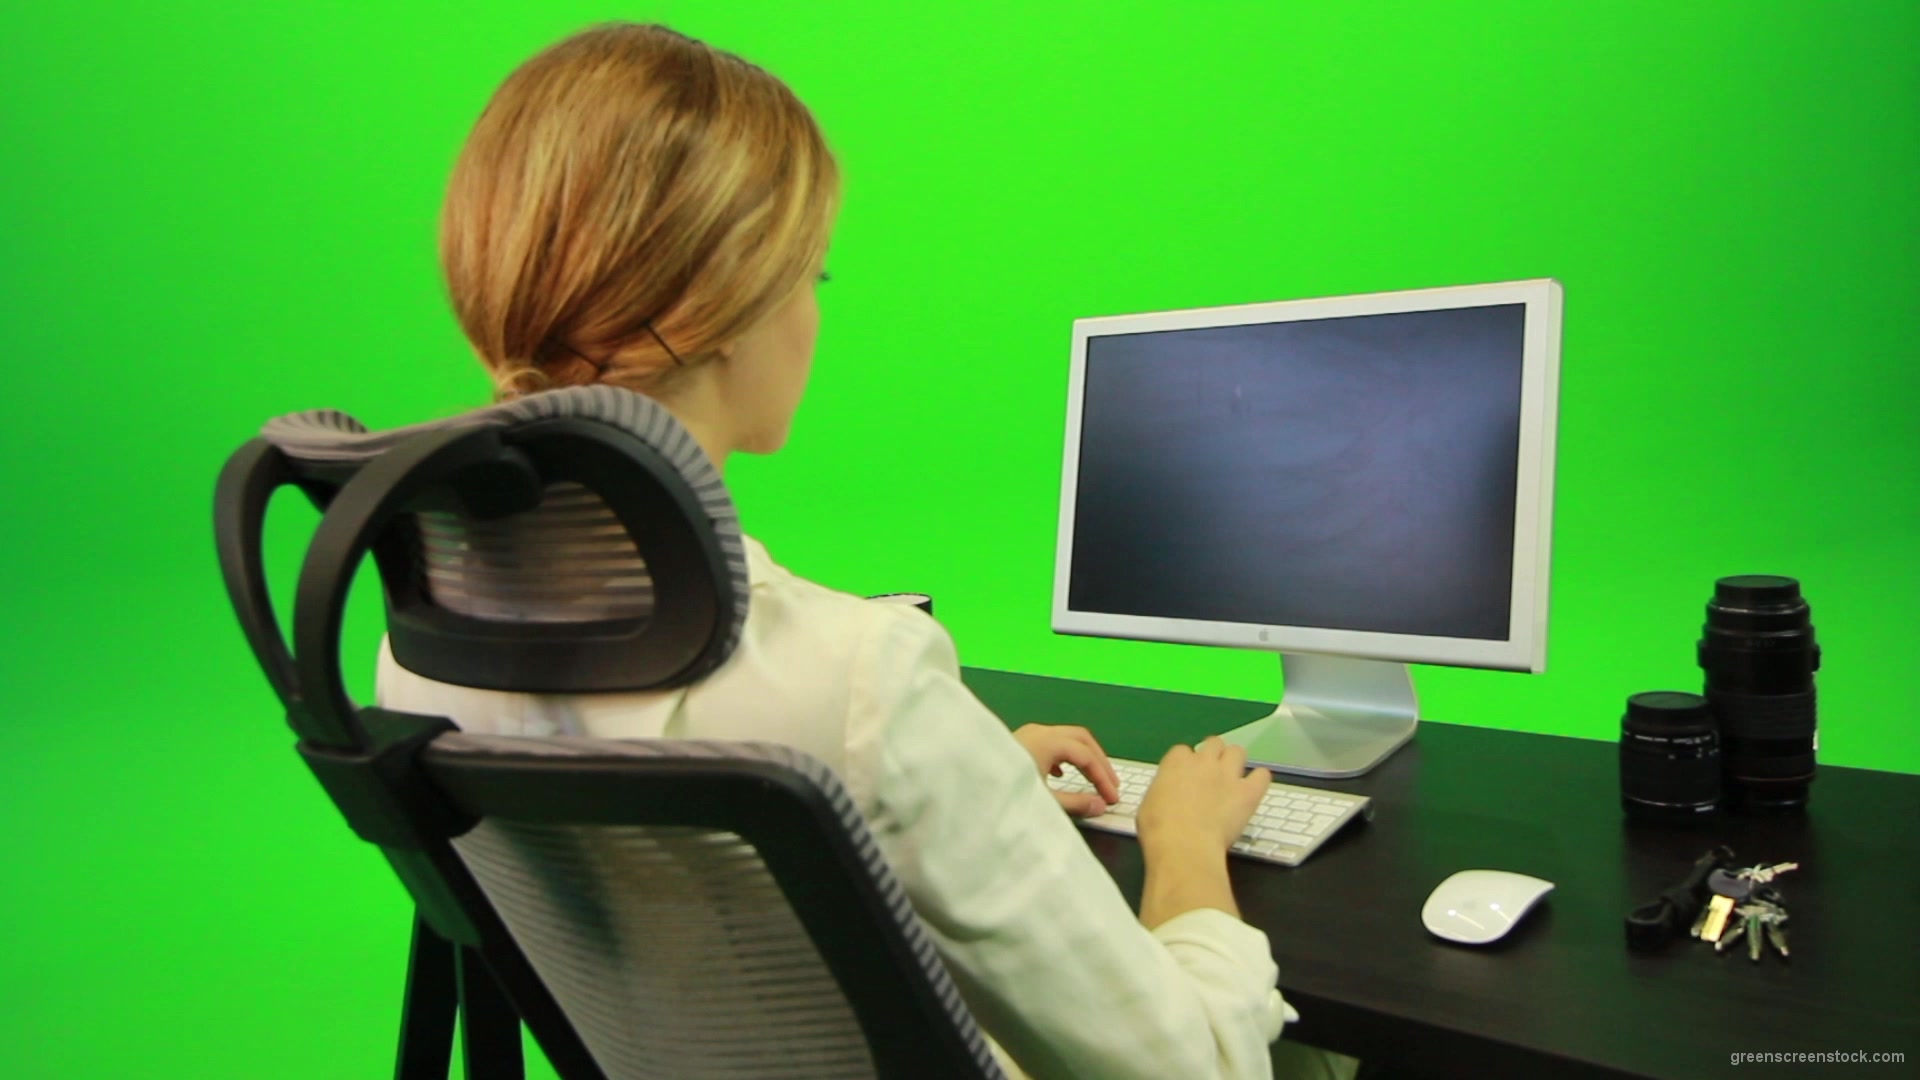 vj video background Woman-Working-on-the-Computer-5-Green-Screen-Footage_003